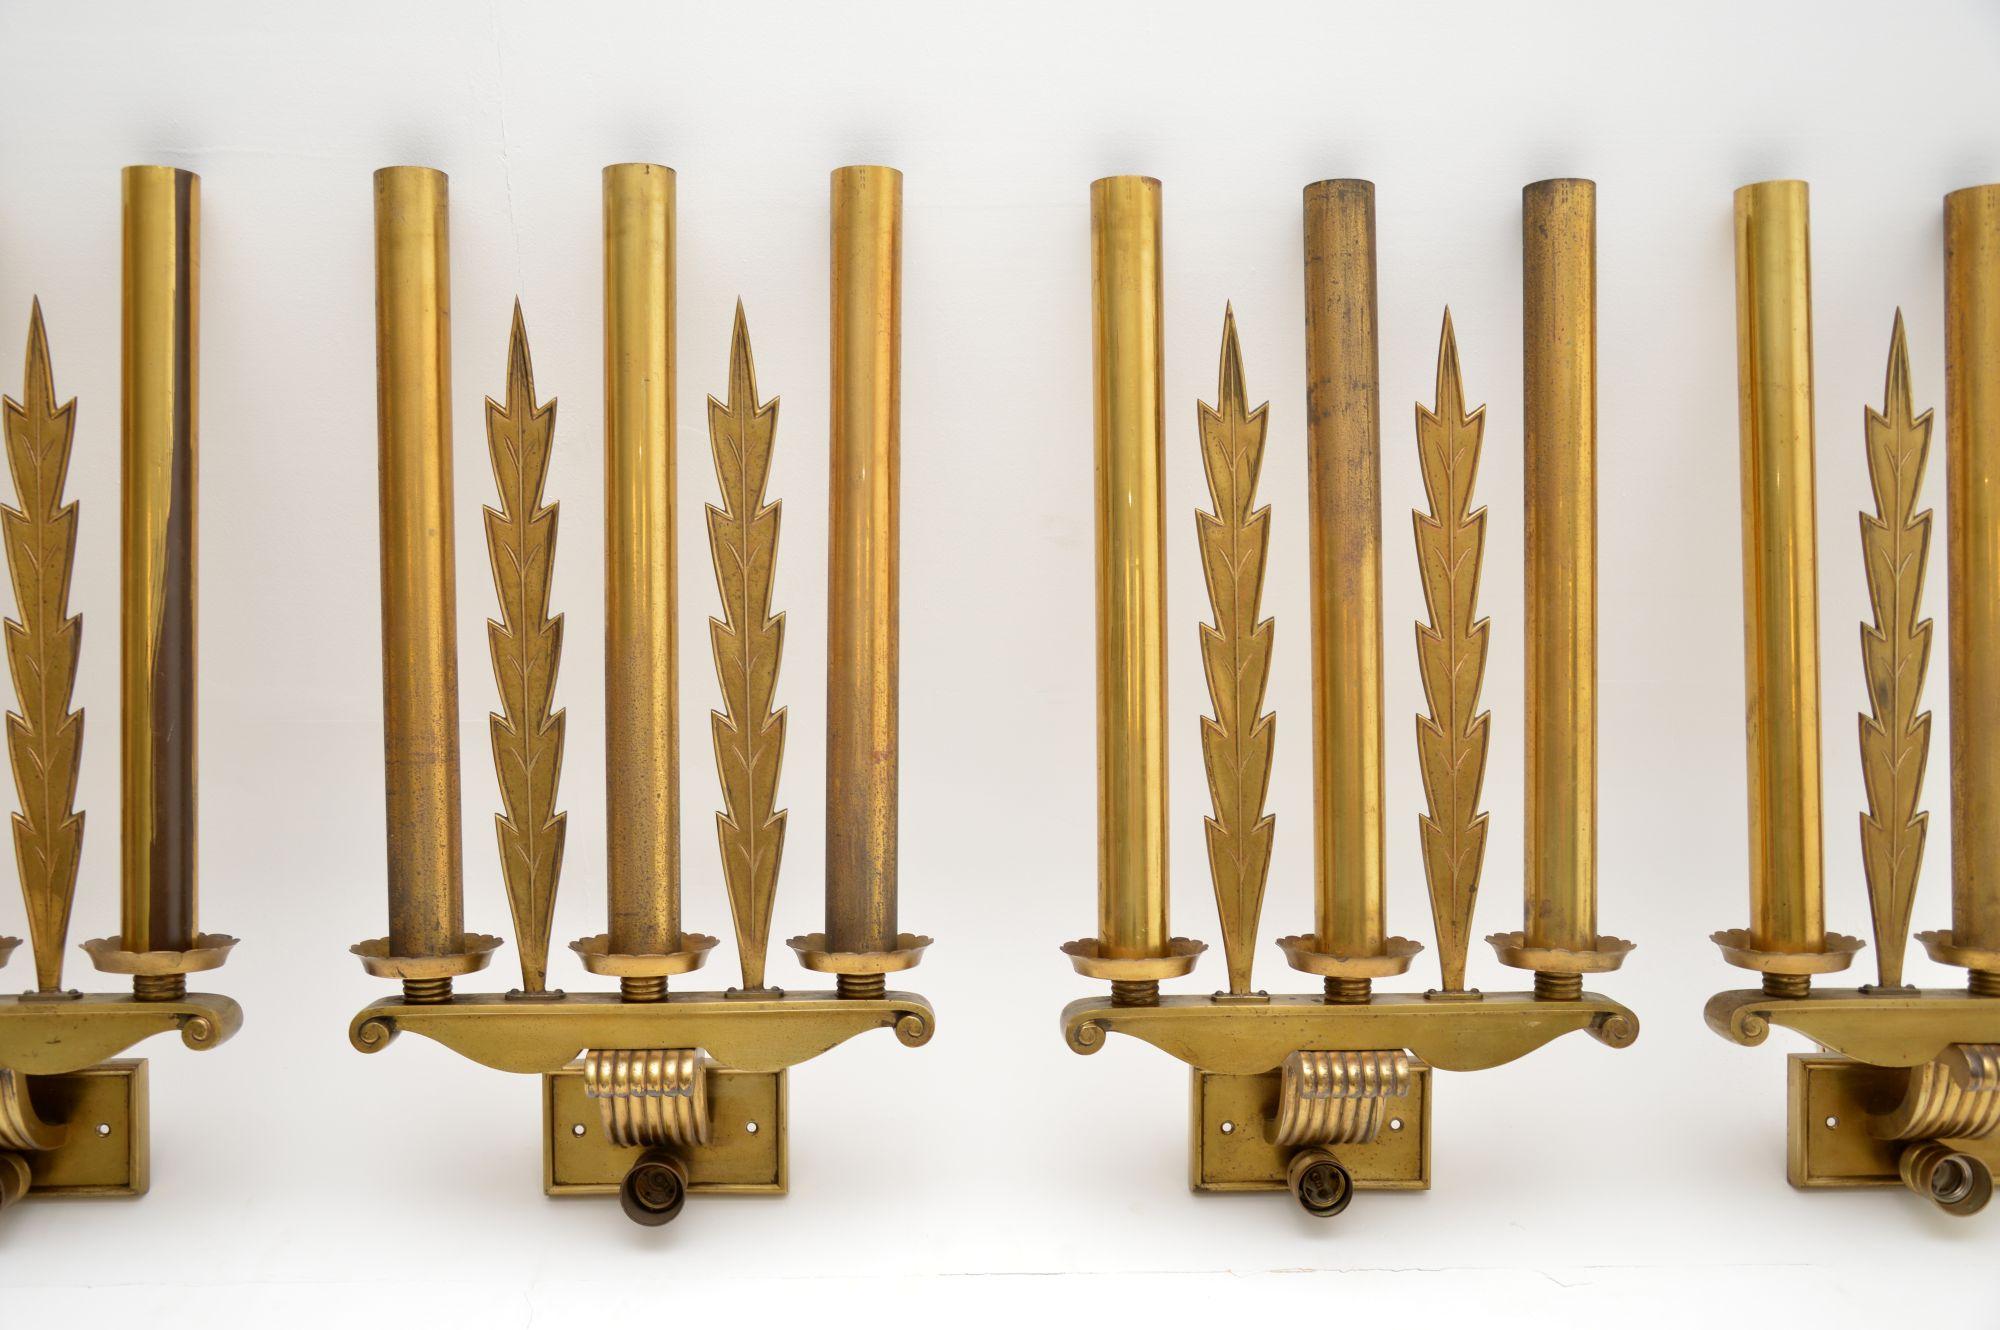 Set of 5 Antique Neoclassical Brass Wall Sconce Lights 1